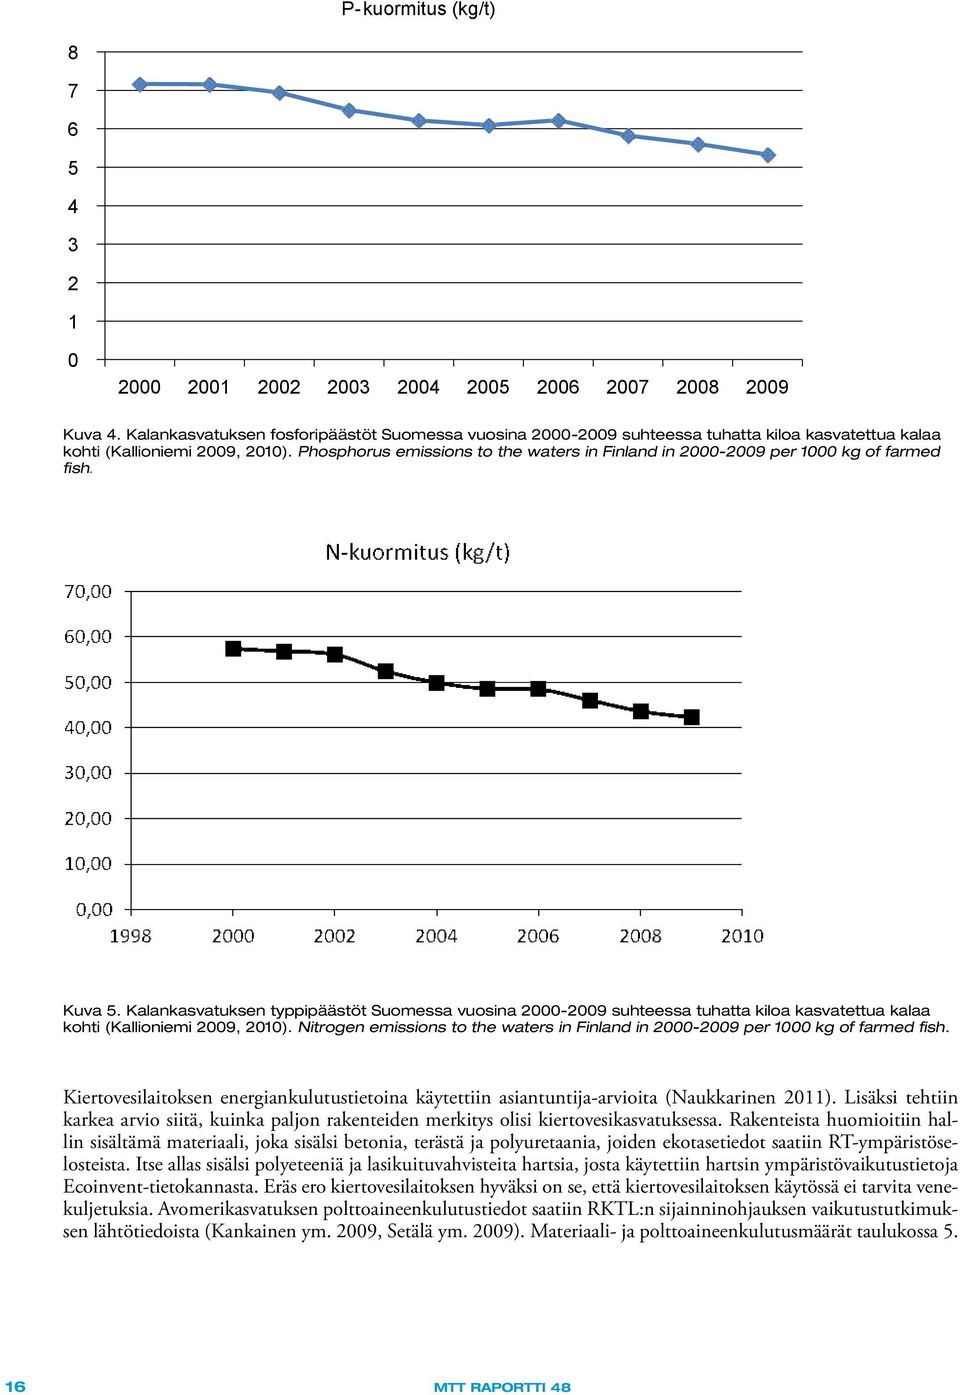 Phosphorus emissions to the waters in Finland in 2000-2009 per 1000 kg of farmed fish. Kuva 5.